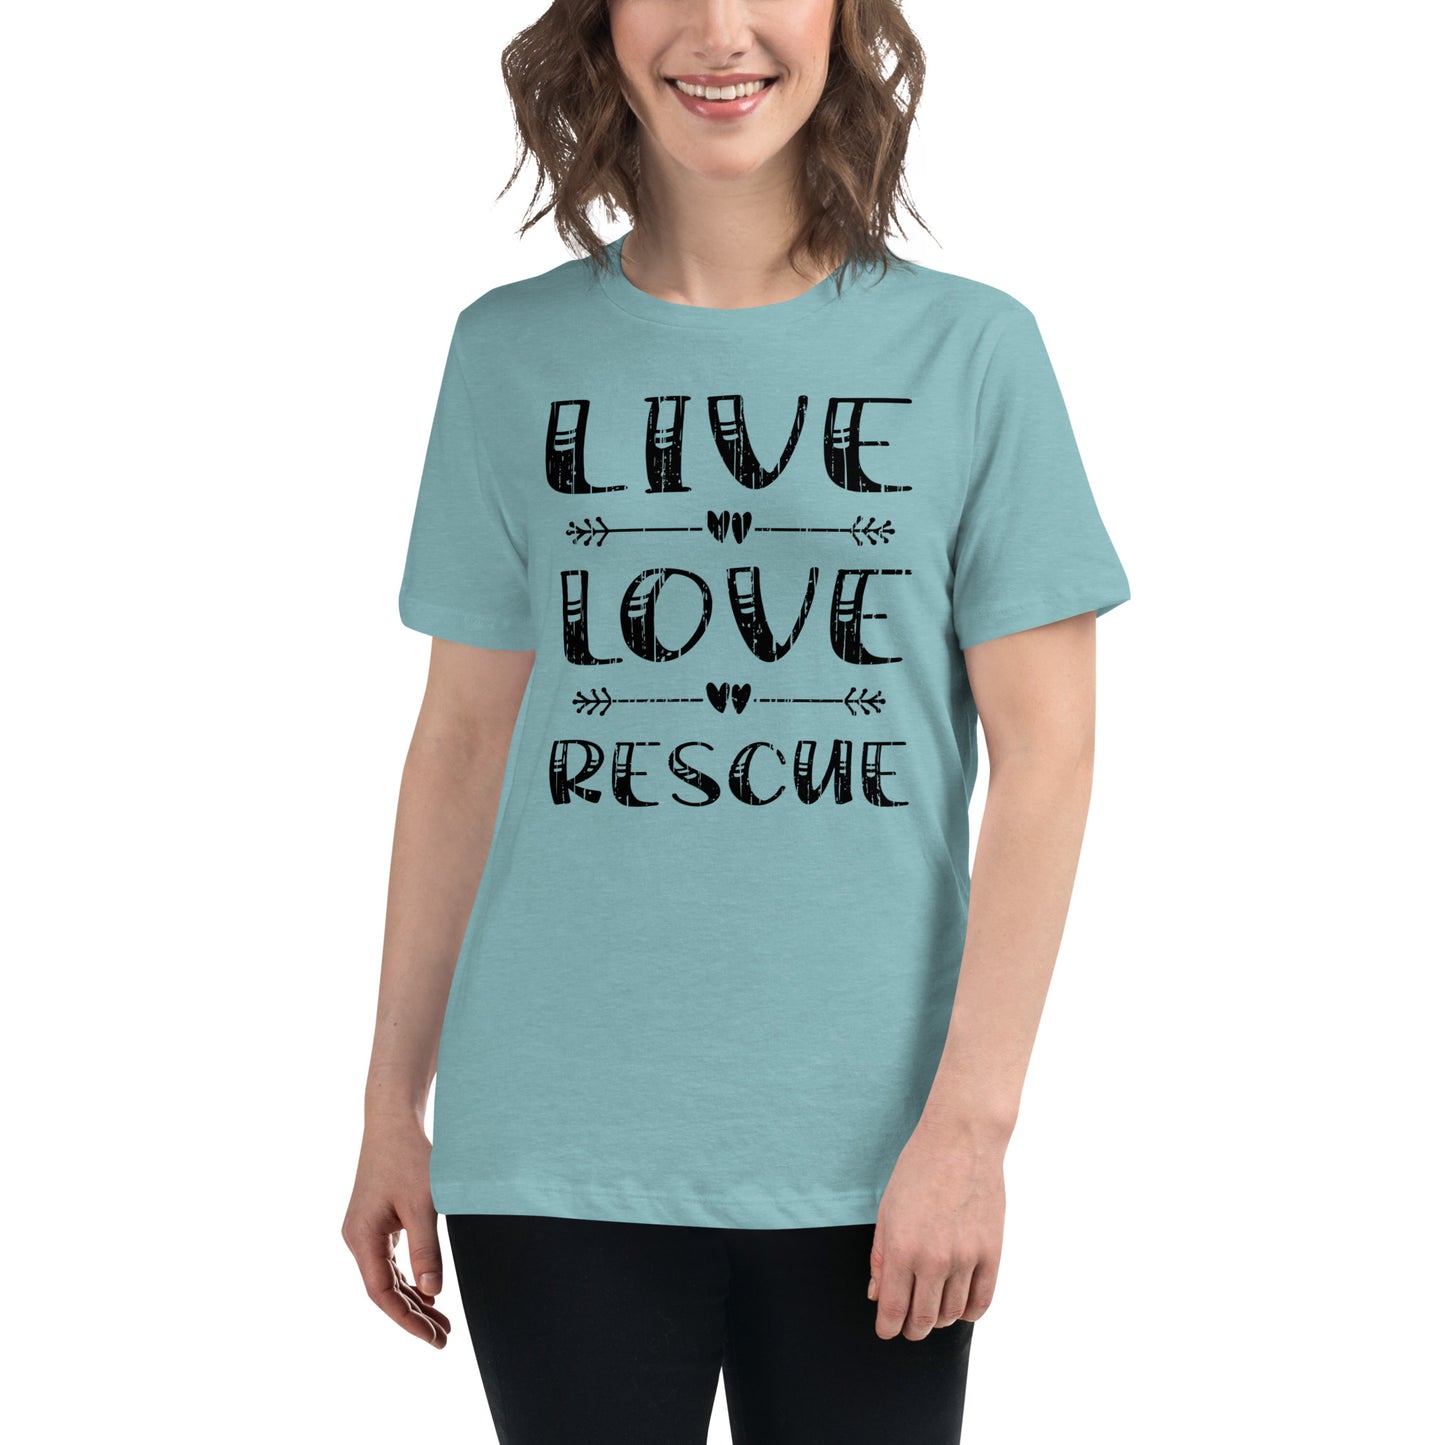 Live love rescue women’s relaxed fit t-shirts by Dog Artistry heather blue lagoon color